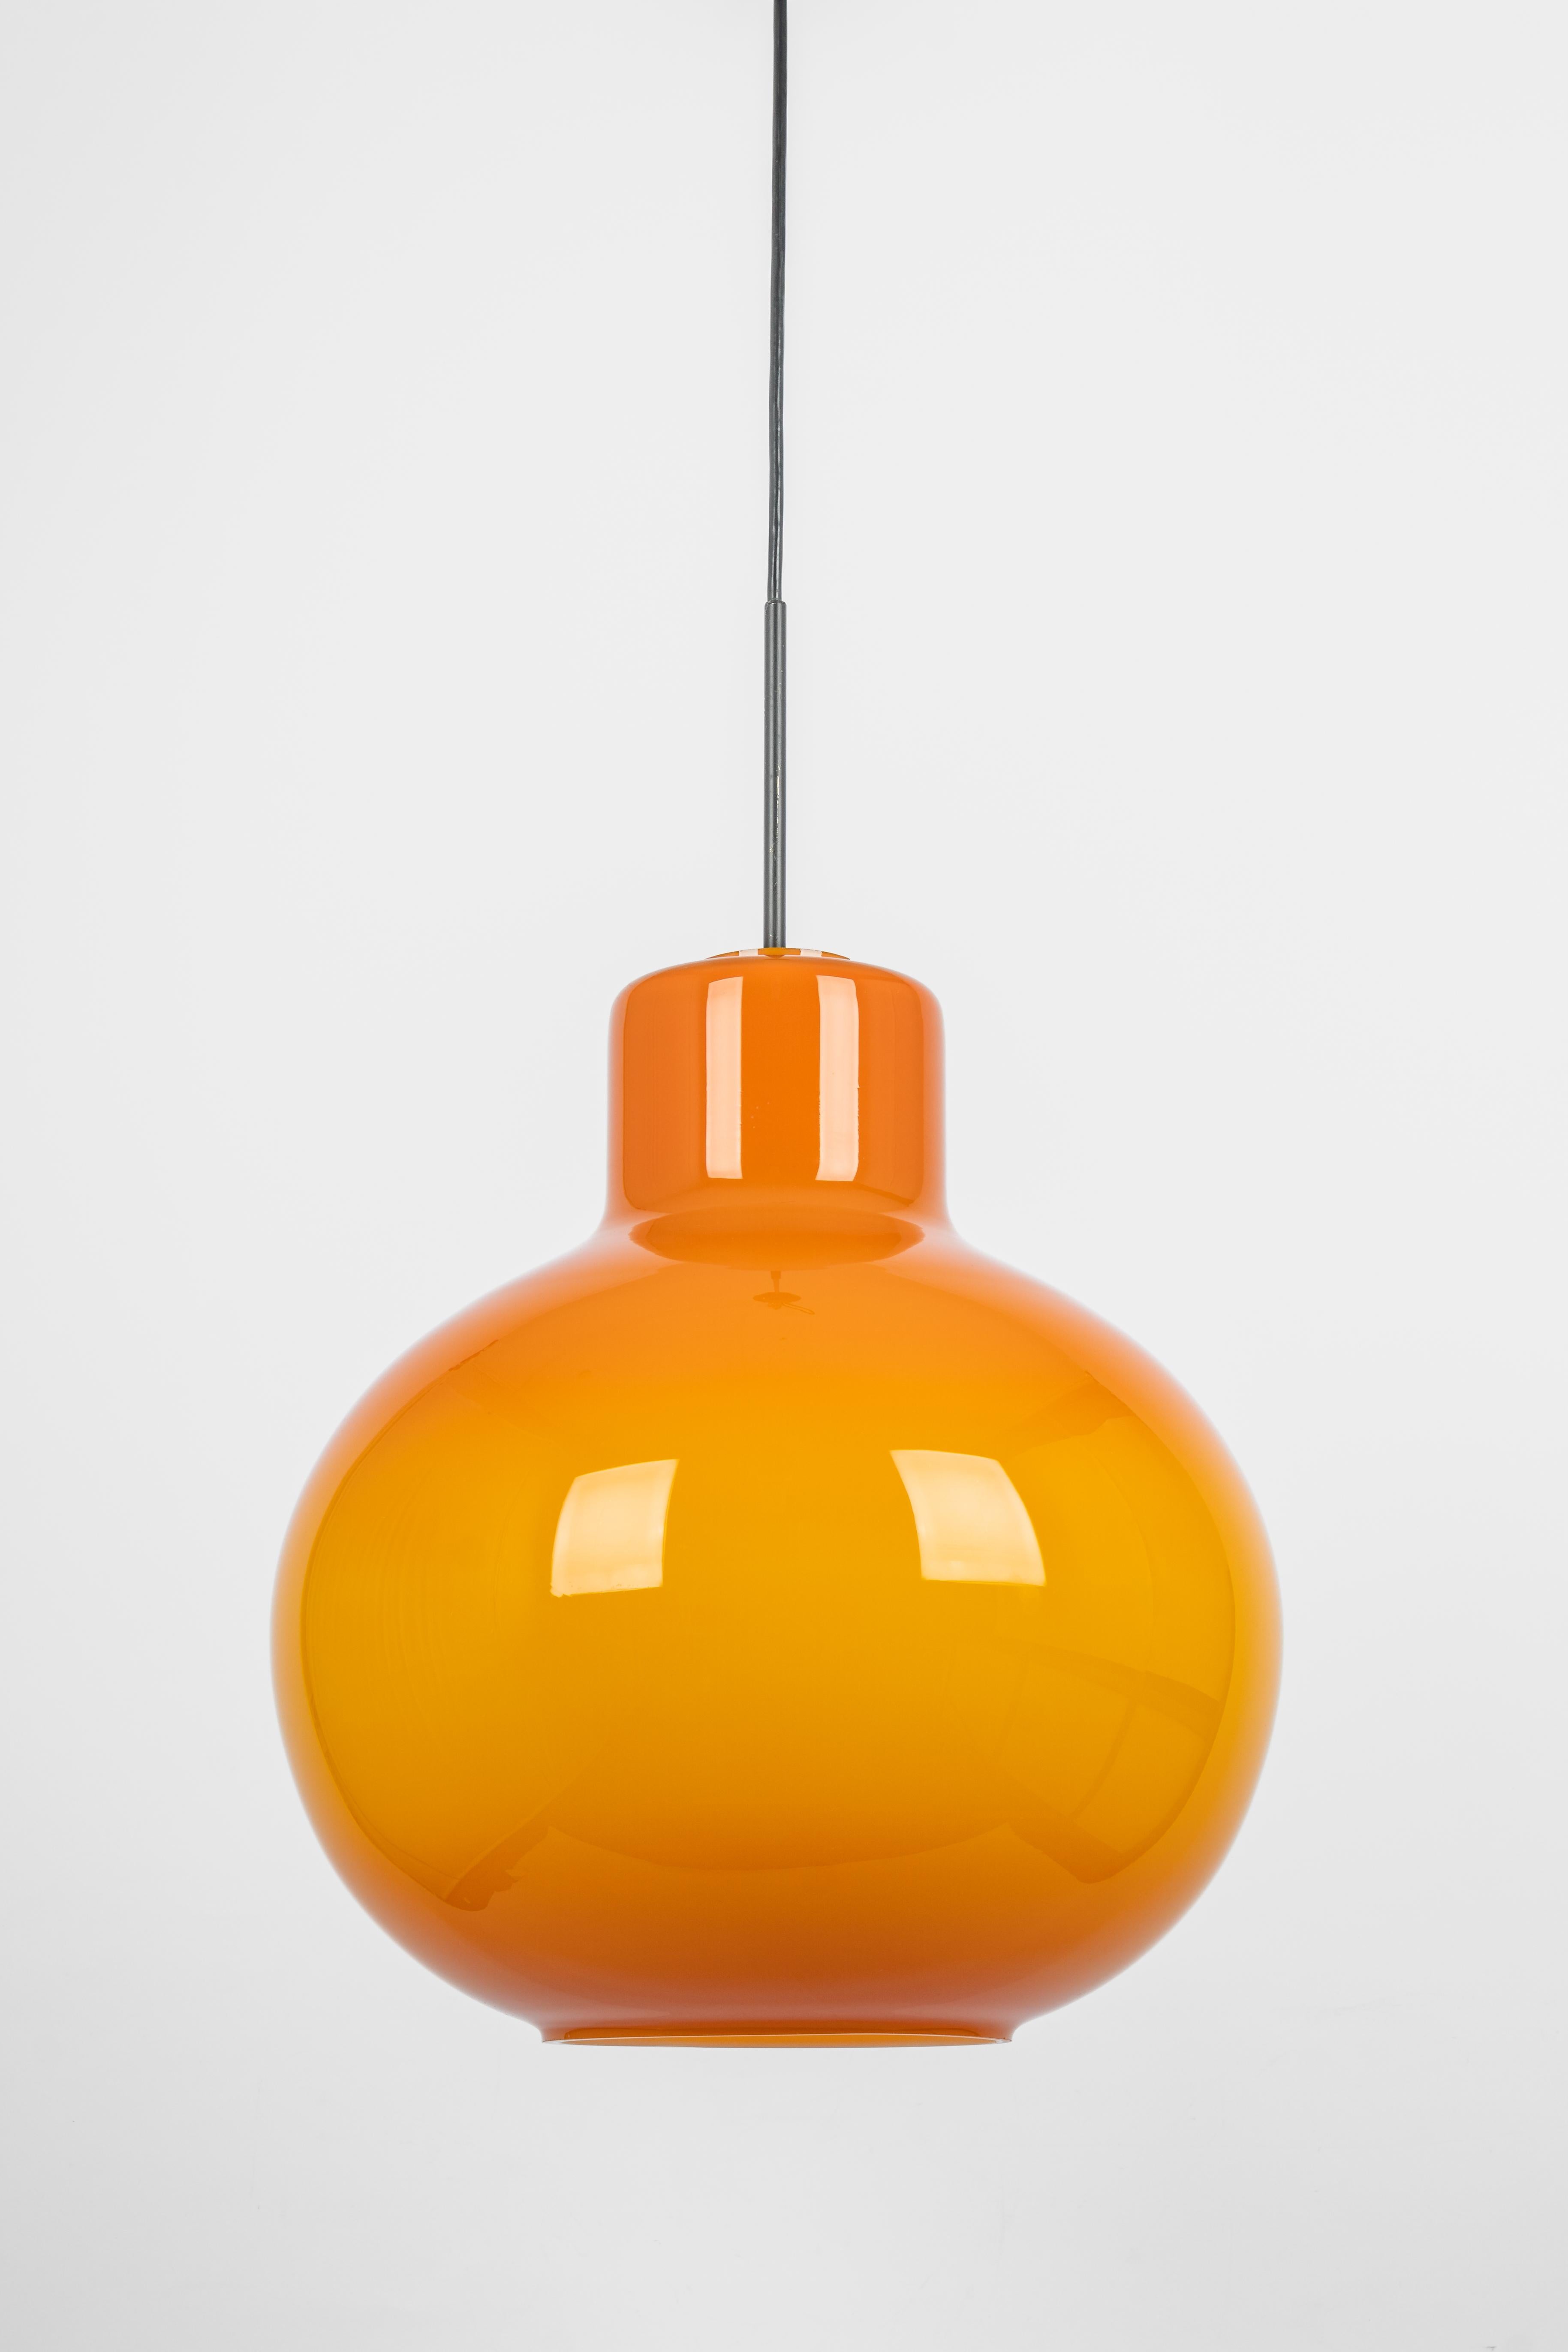 Mid-Century Modern 1 of 3 Large Opal Orange Ball Pendant Light by Doria, Germany, 1970s For Sale